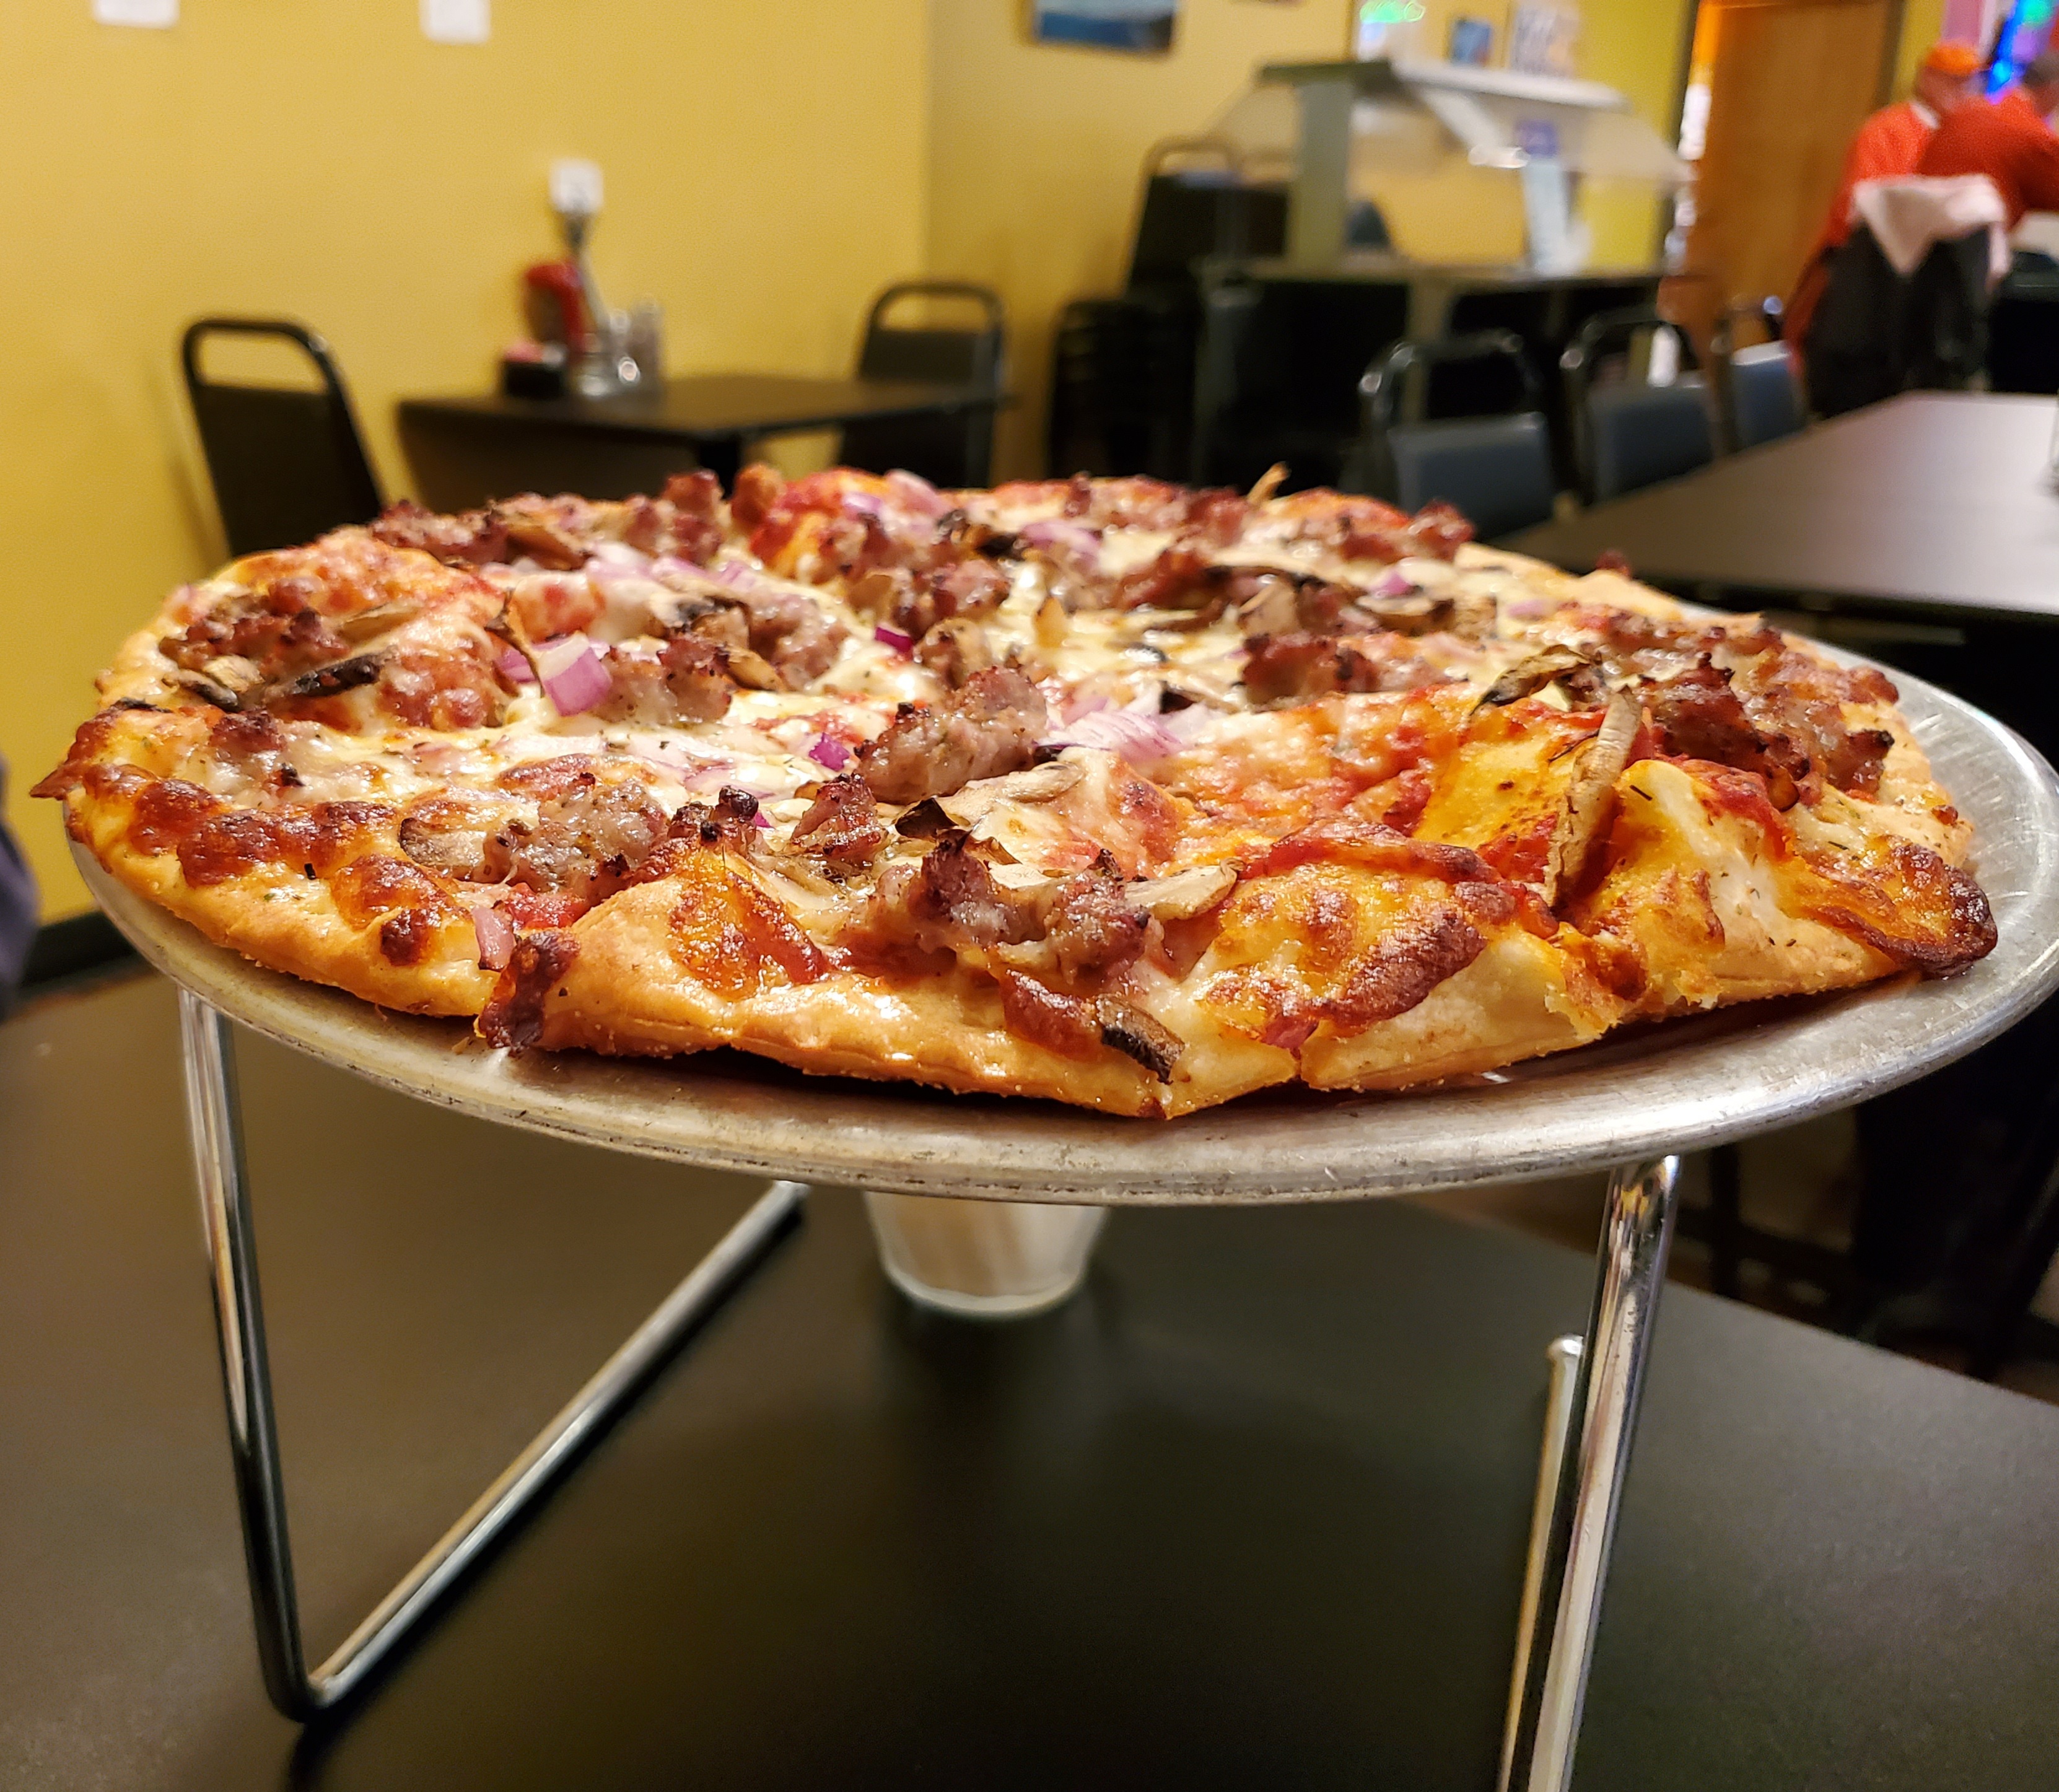 On a gray table, there is a pizza holder with a thin crust pizza sliced. Photo by Carl Busch.